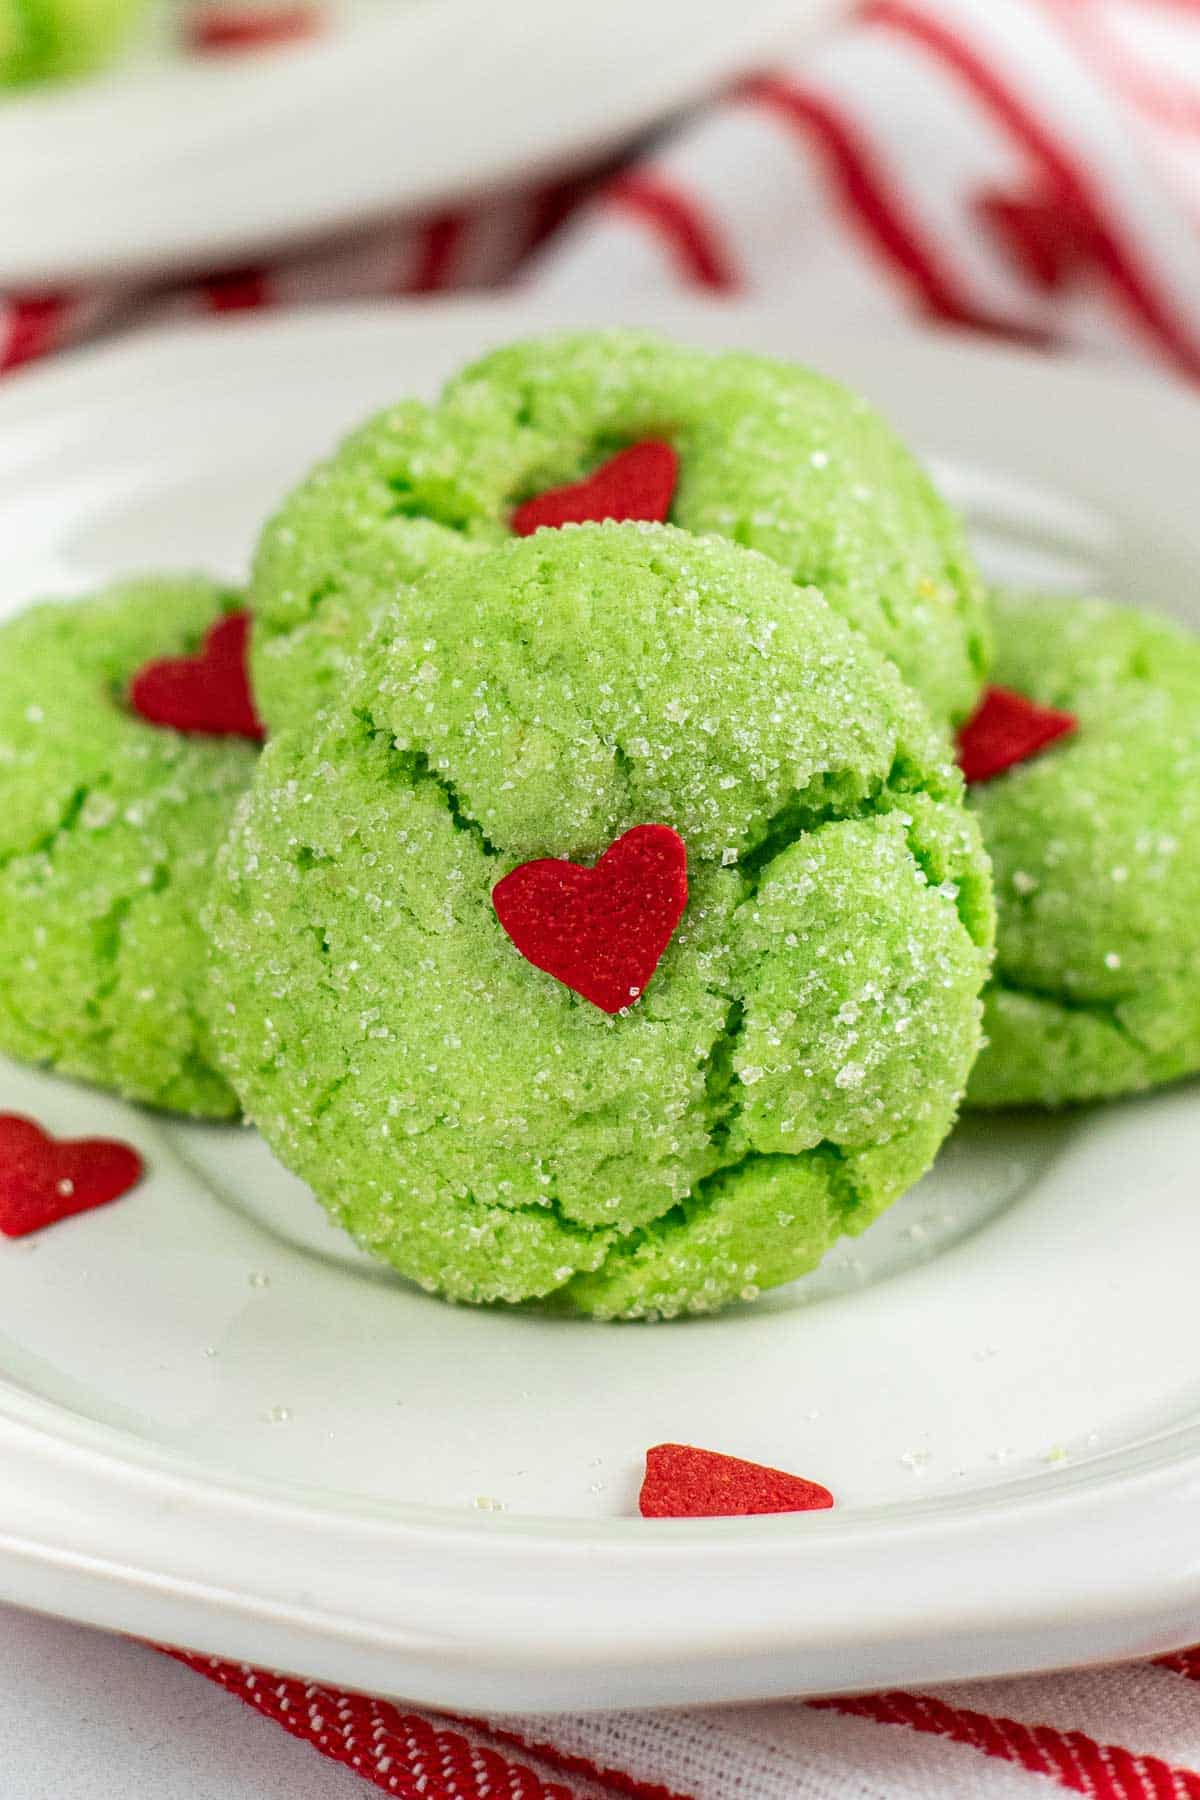 The Grinch' recipe for Christmas